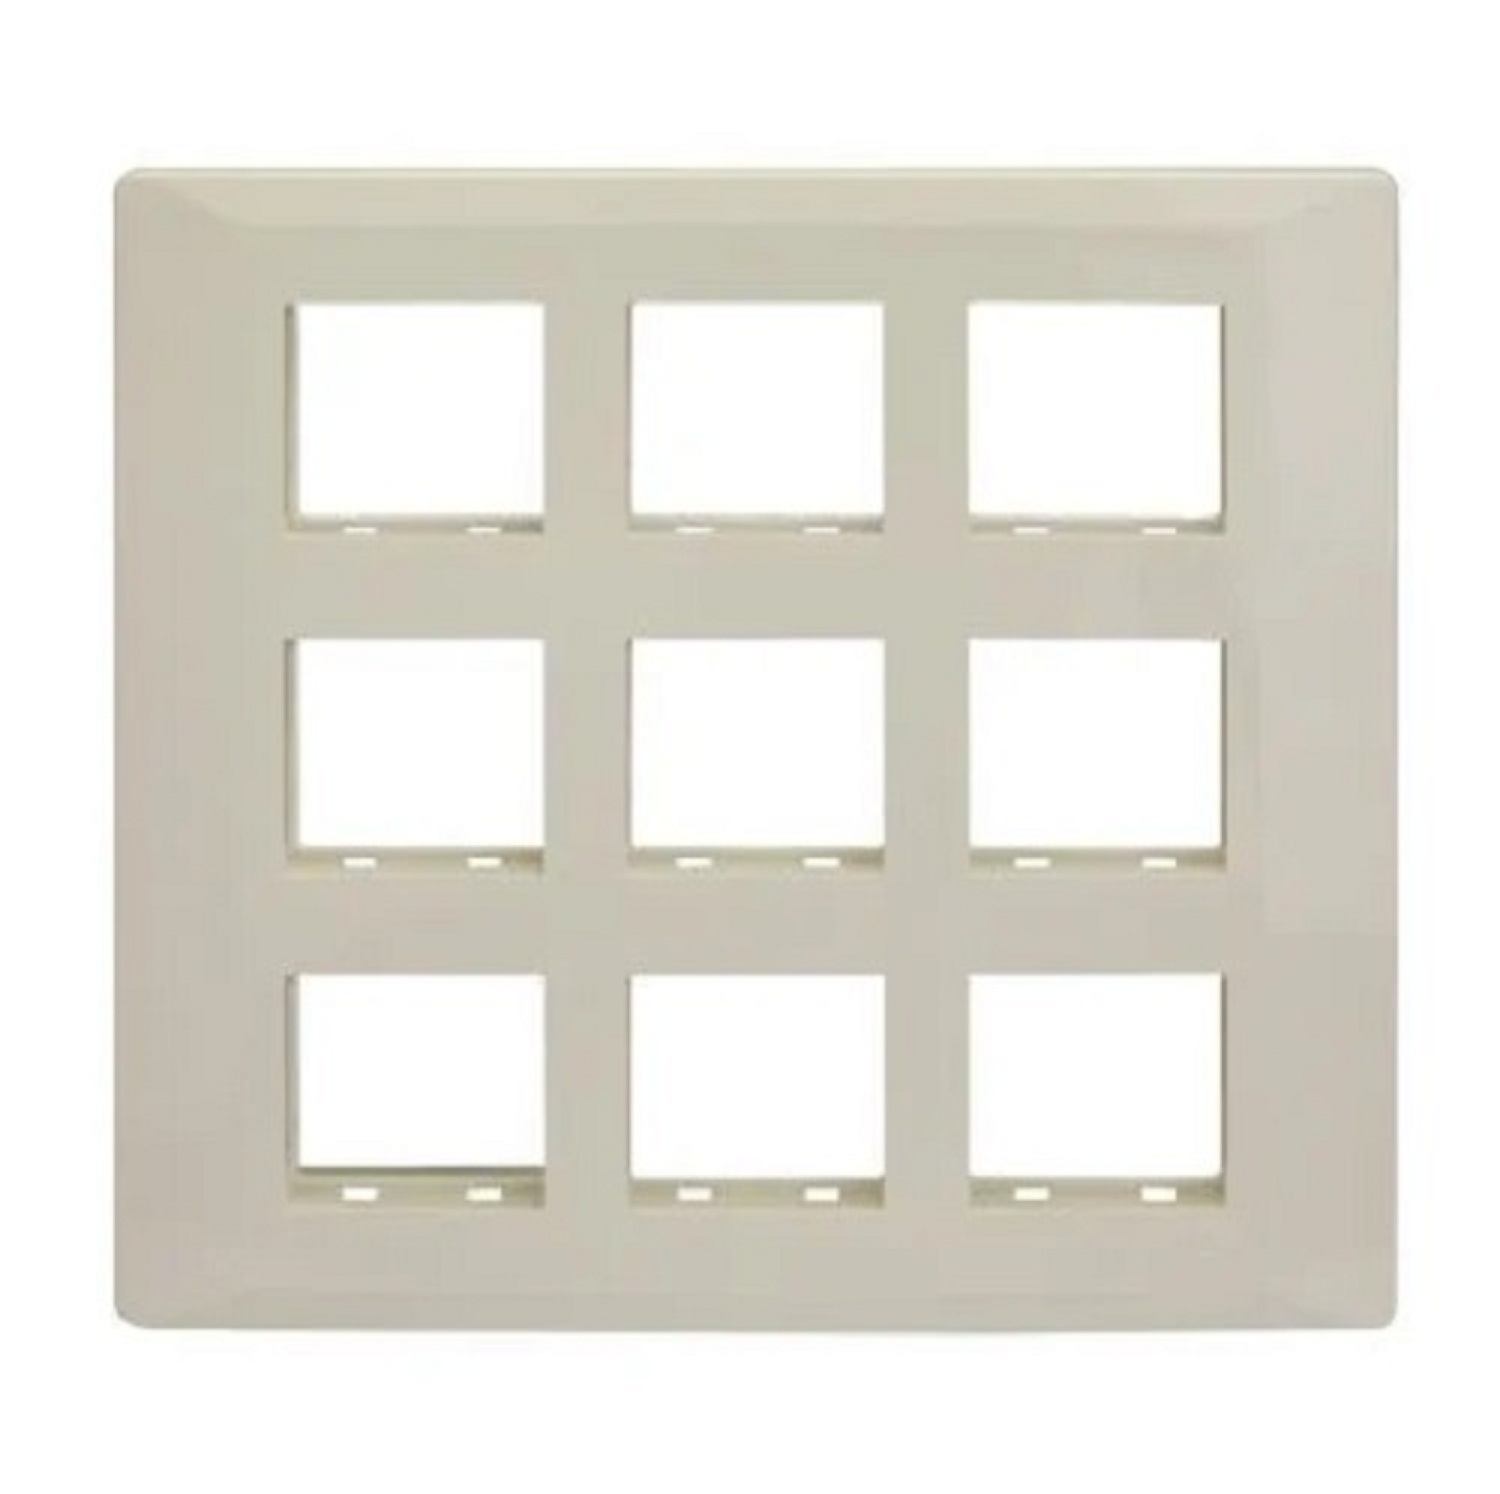 LT Entice 18 Module (Regular) Cover Plate with Base Frame - White